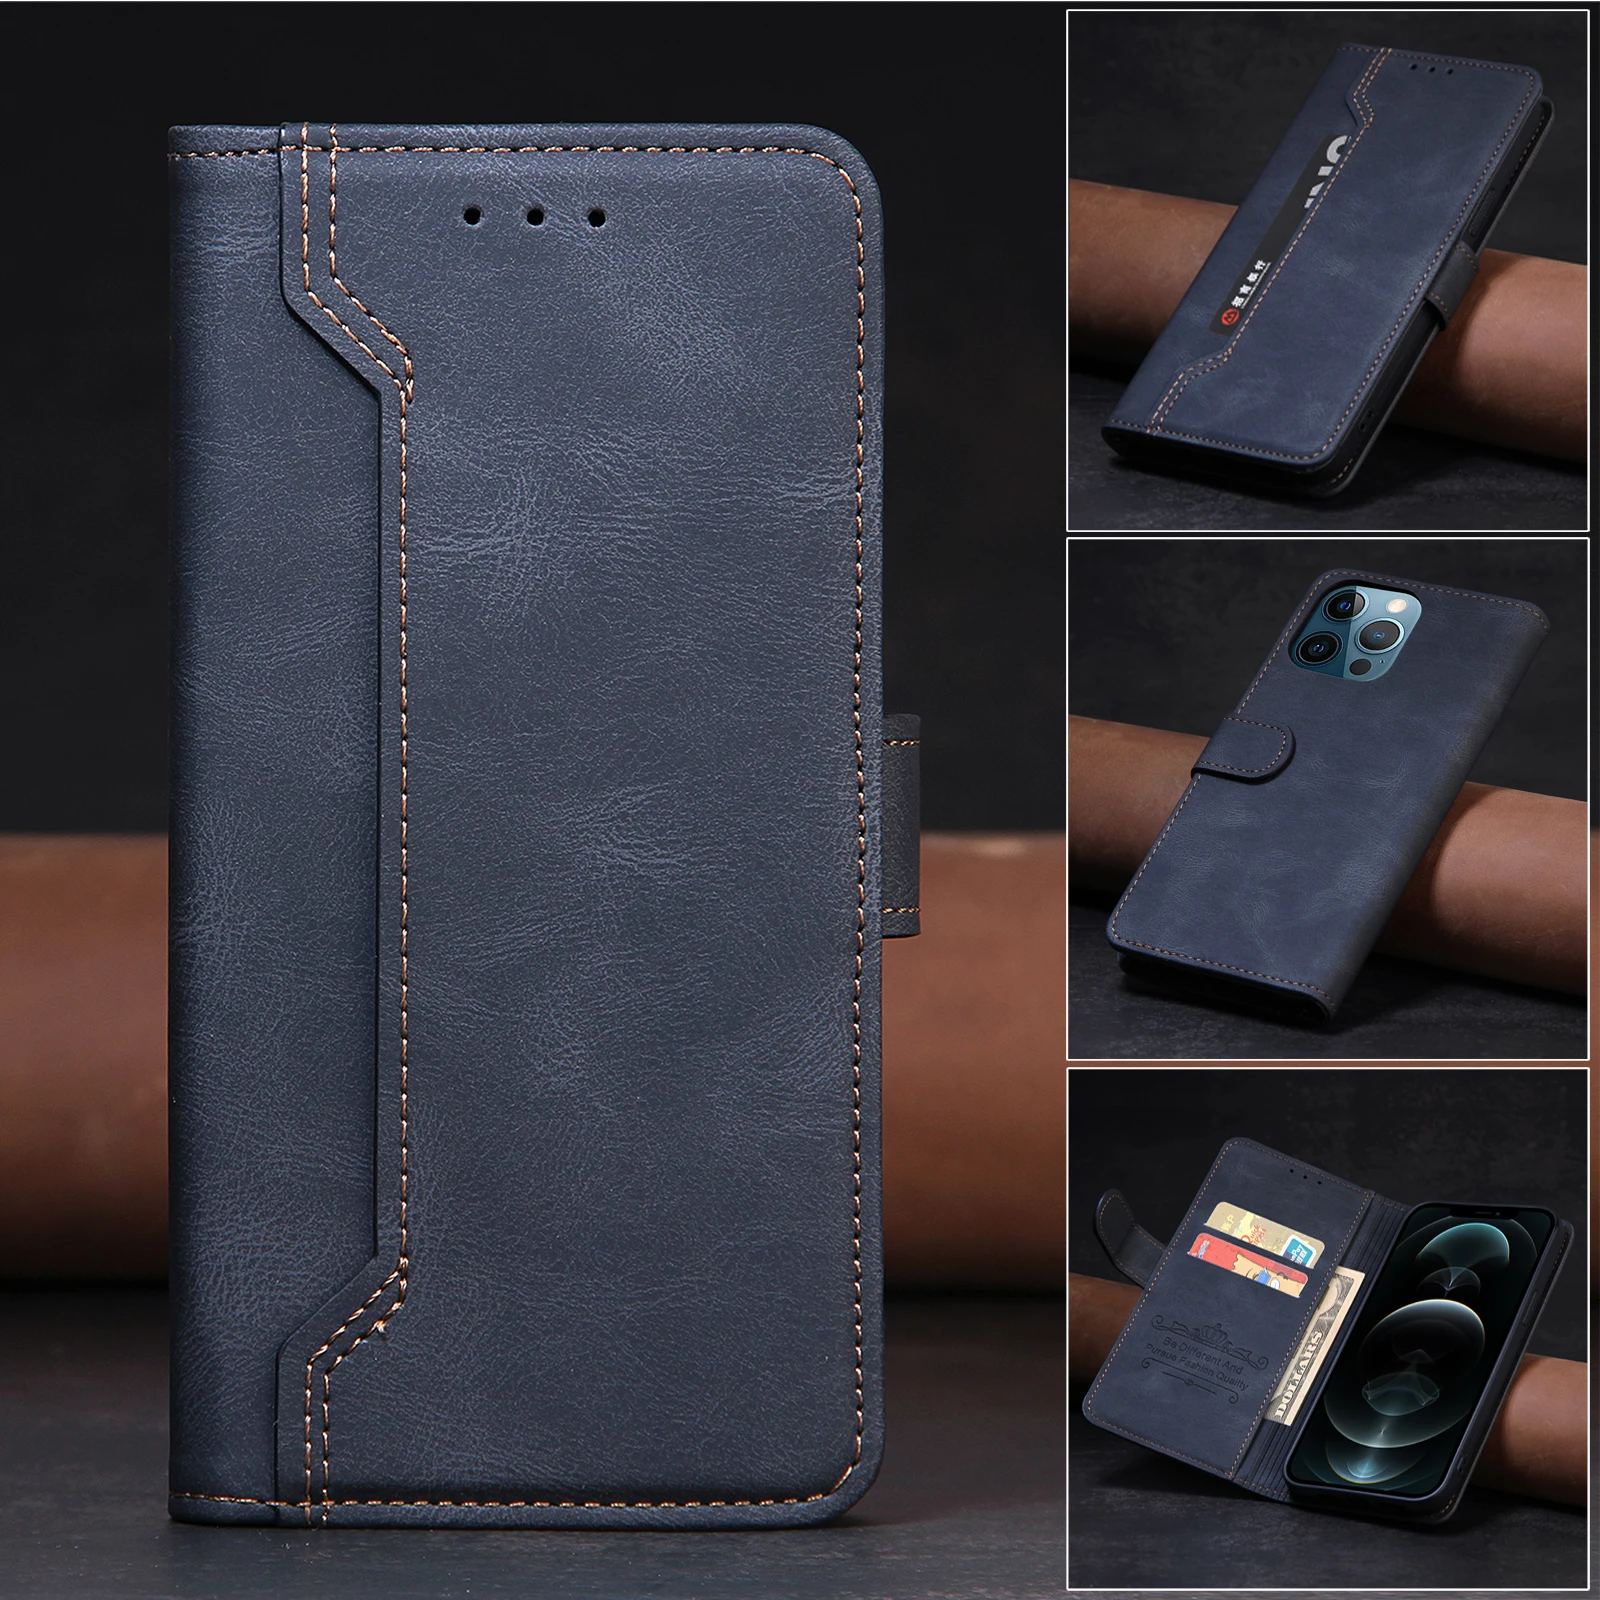 

Leather Case For Samsung Galaxy A12 A22 A32 4G A52 A52S A42 A72 A02S A03S A31 A40 A41 A50 A30S A70 A51 A71 5G Flip Wallet Cover